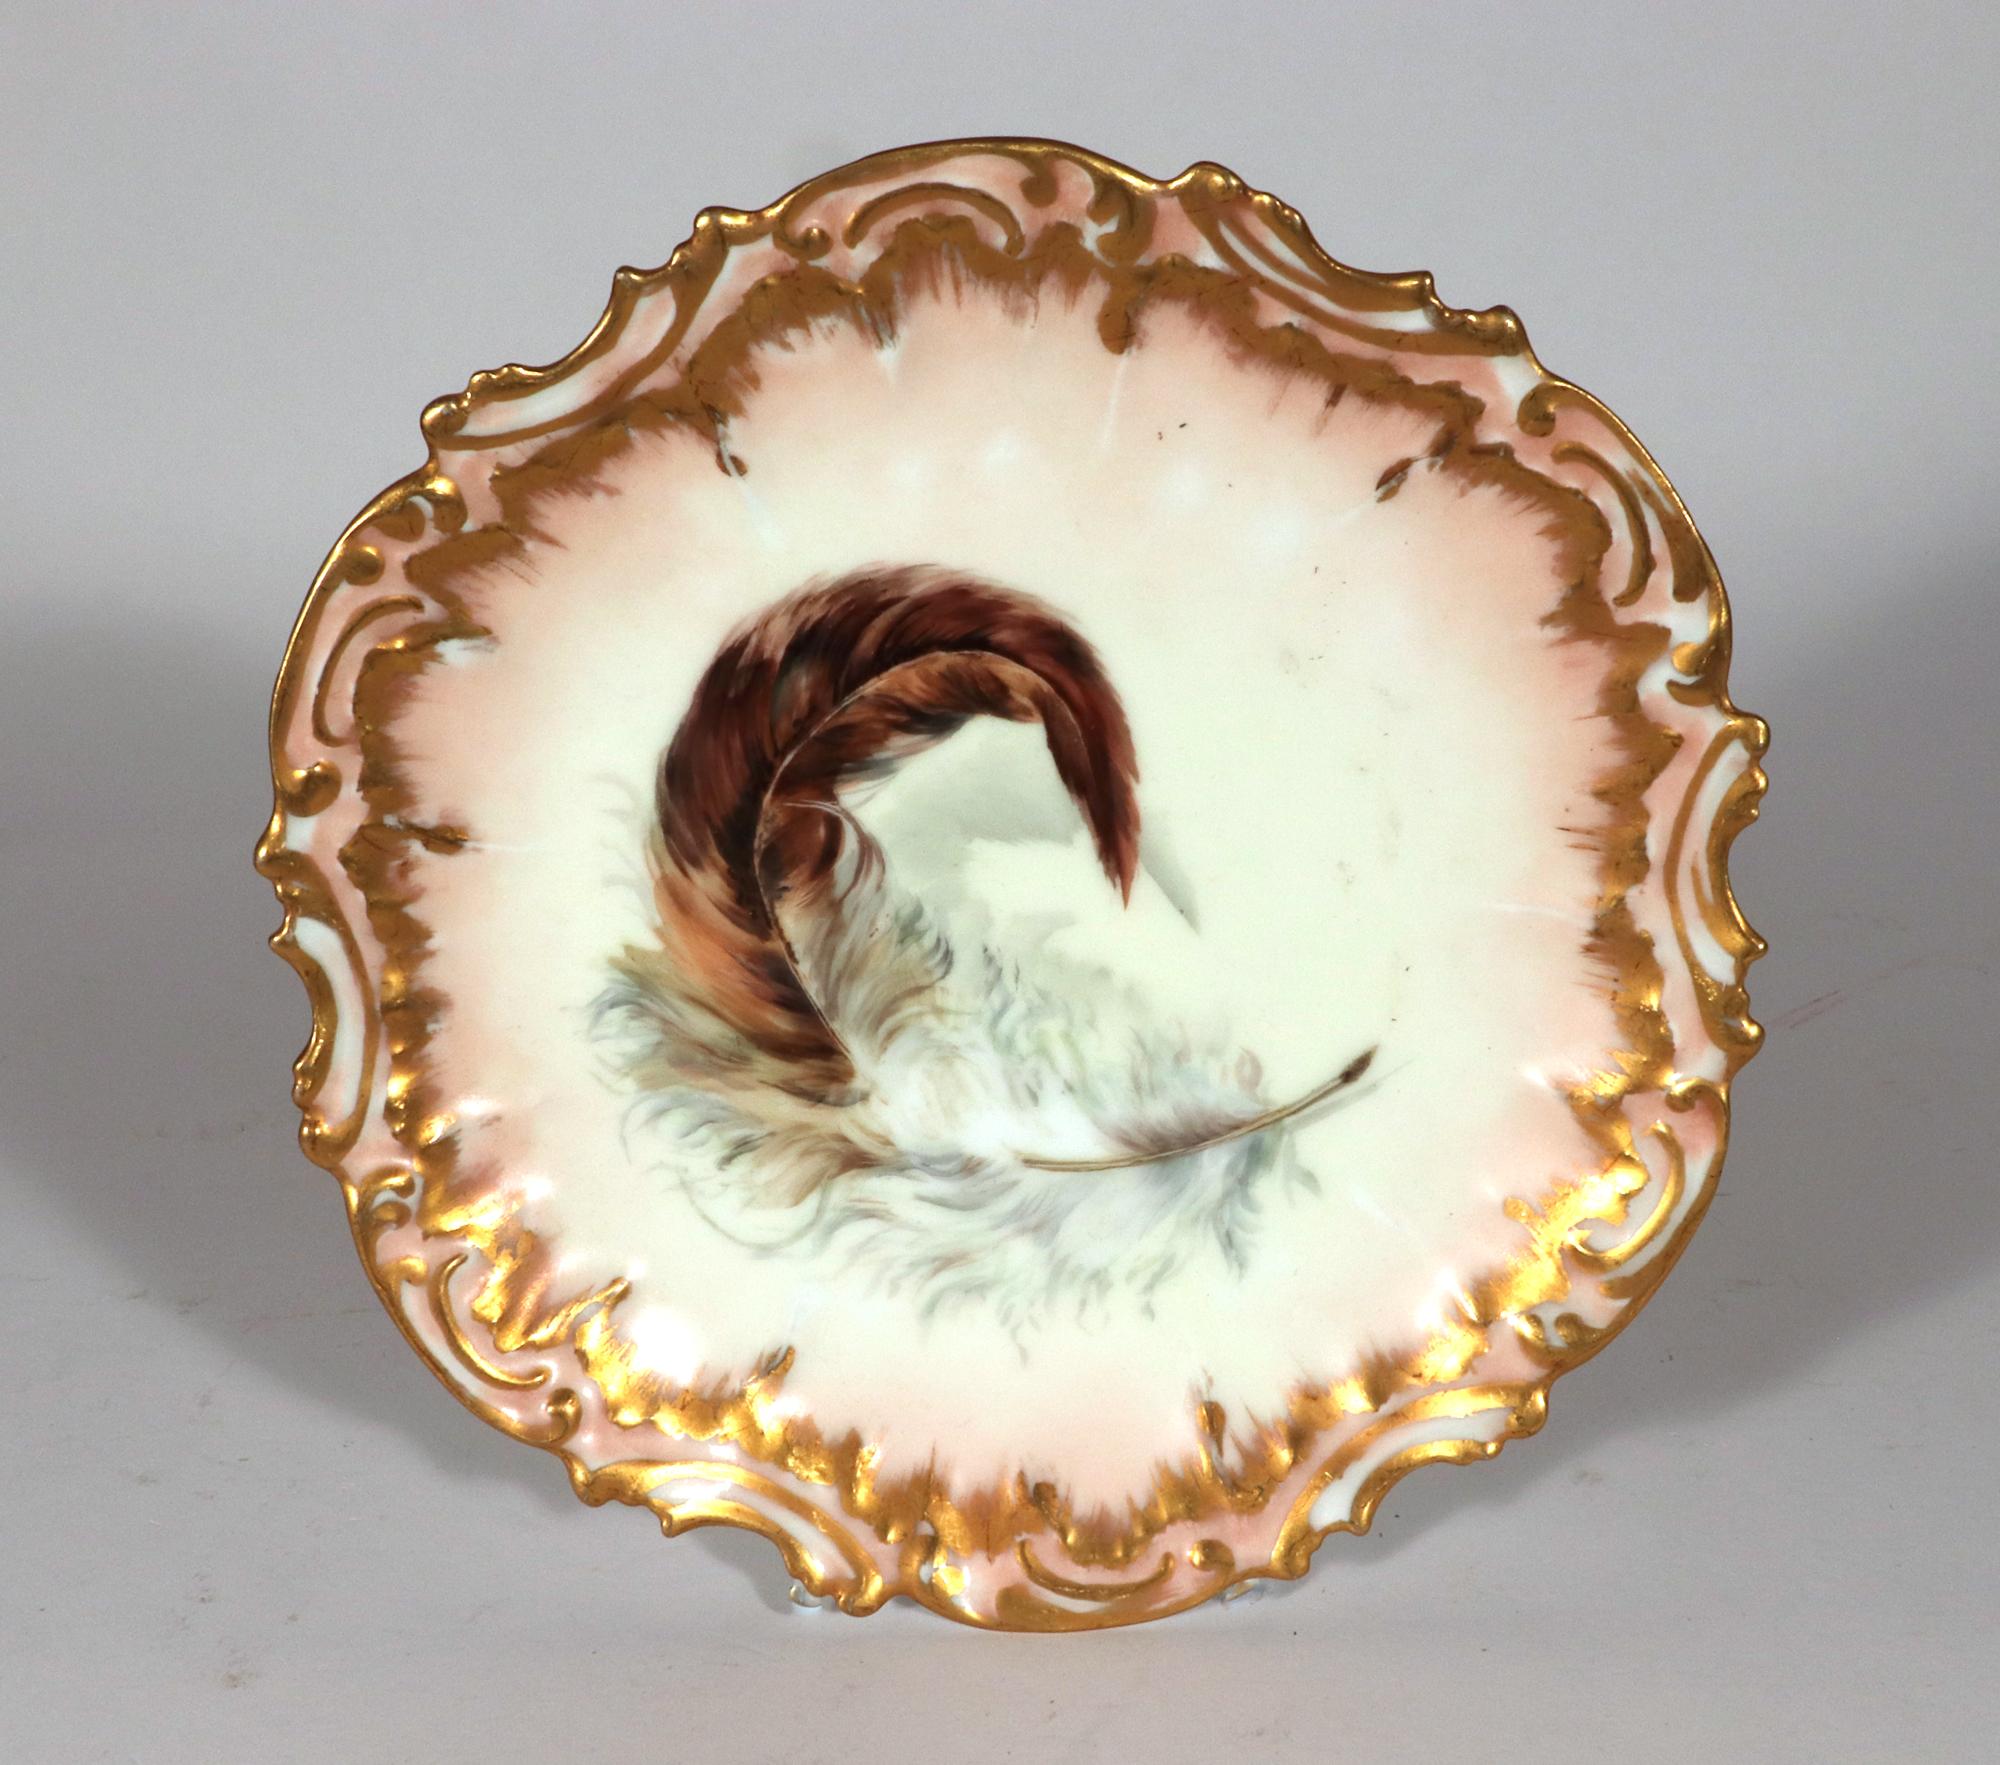 Limoges Porcelain Dessert Plates decorated with Feathers, Set of Ten 6